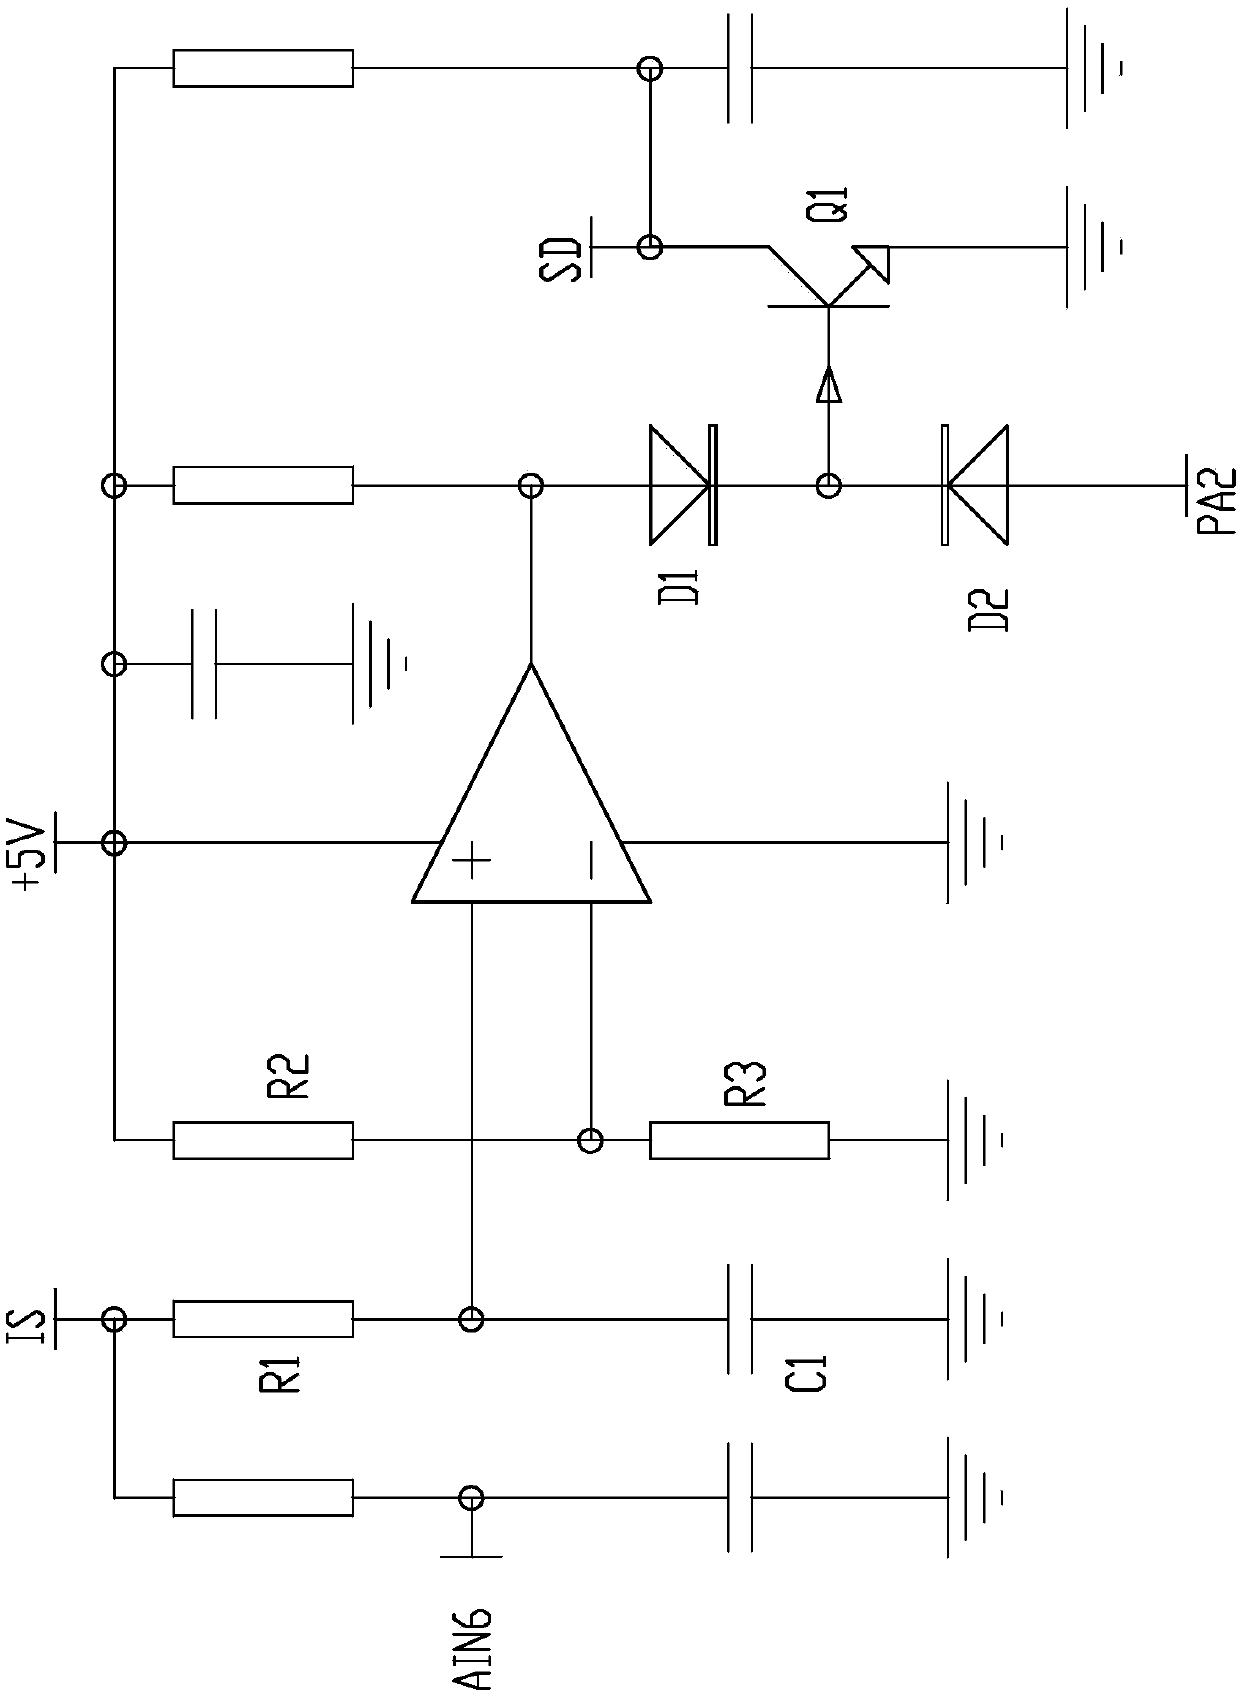 Inverter circuit with overcurrent protection function